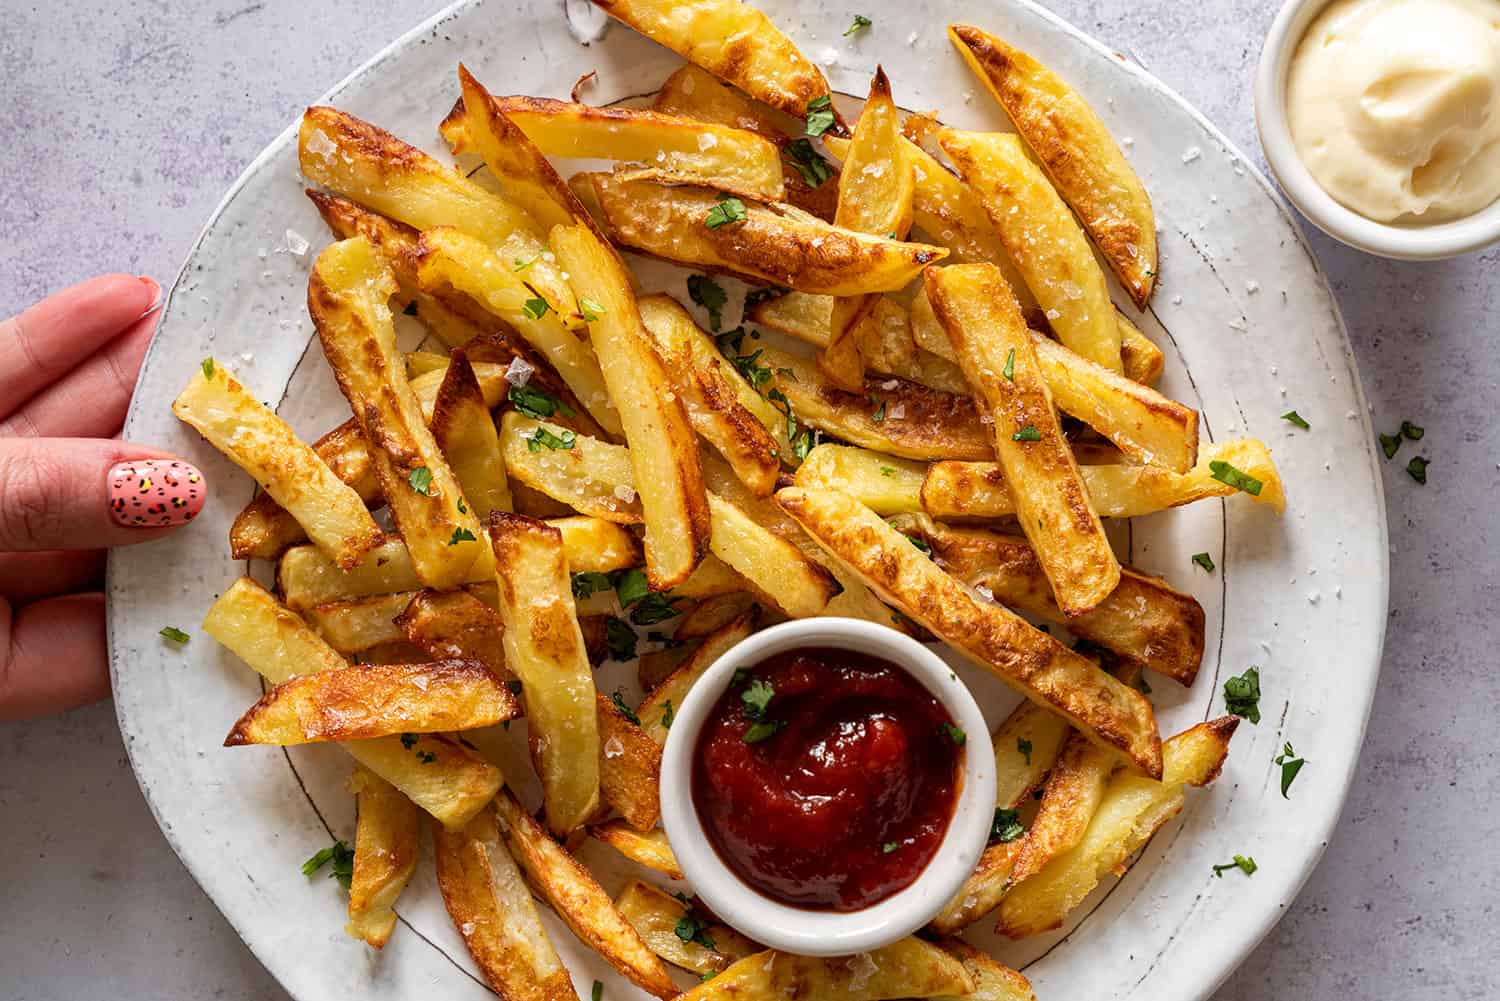 Super Crispy Baked French Fries Recipe - BEST EVER!